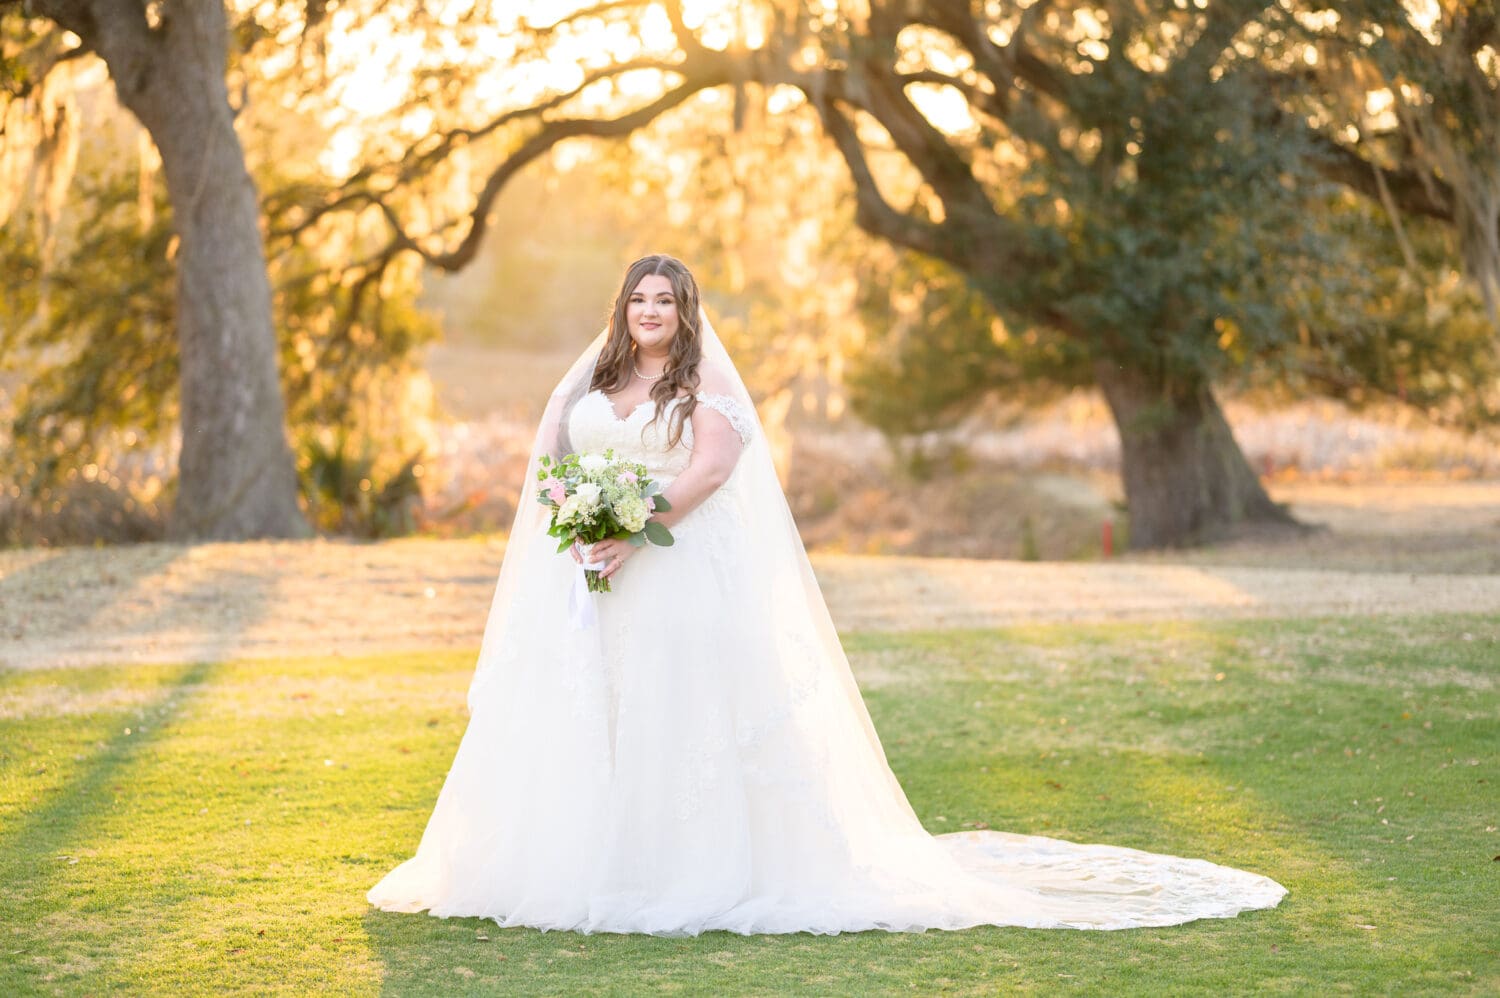 Bride with branches from old oak in the background - Pawleys Plantation Golf & Country Club